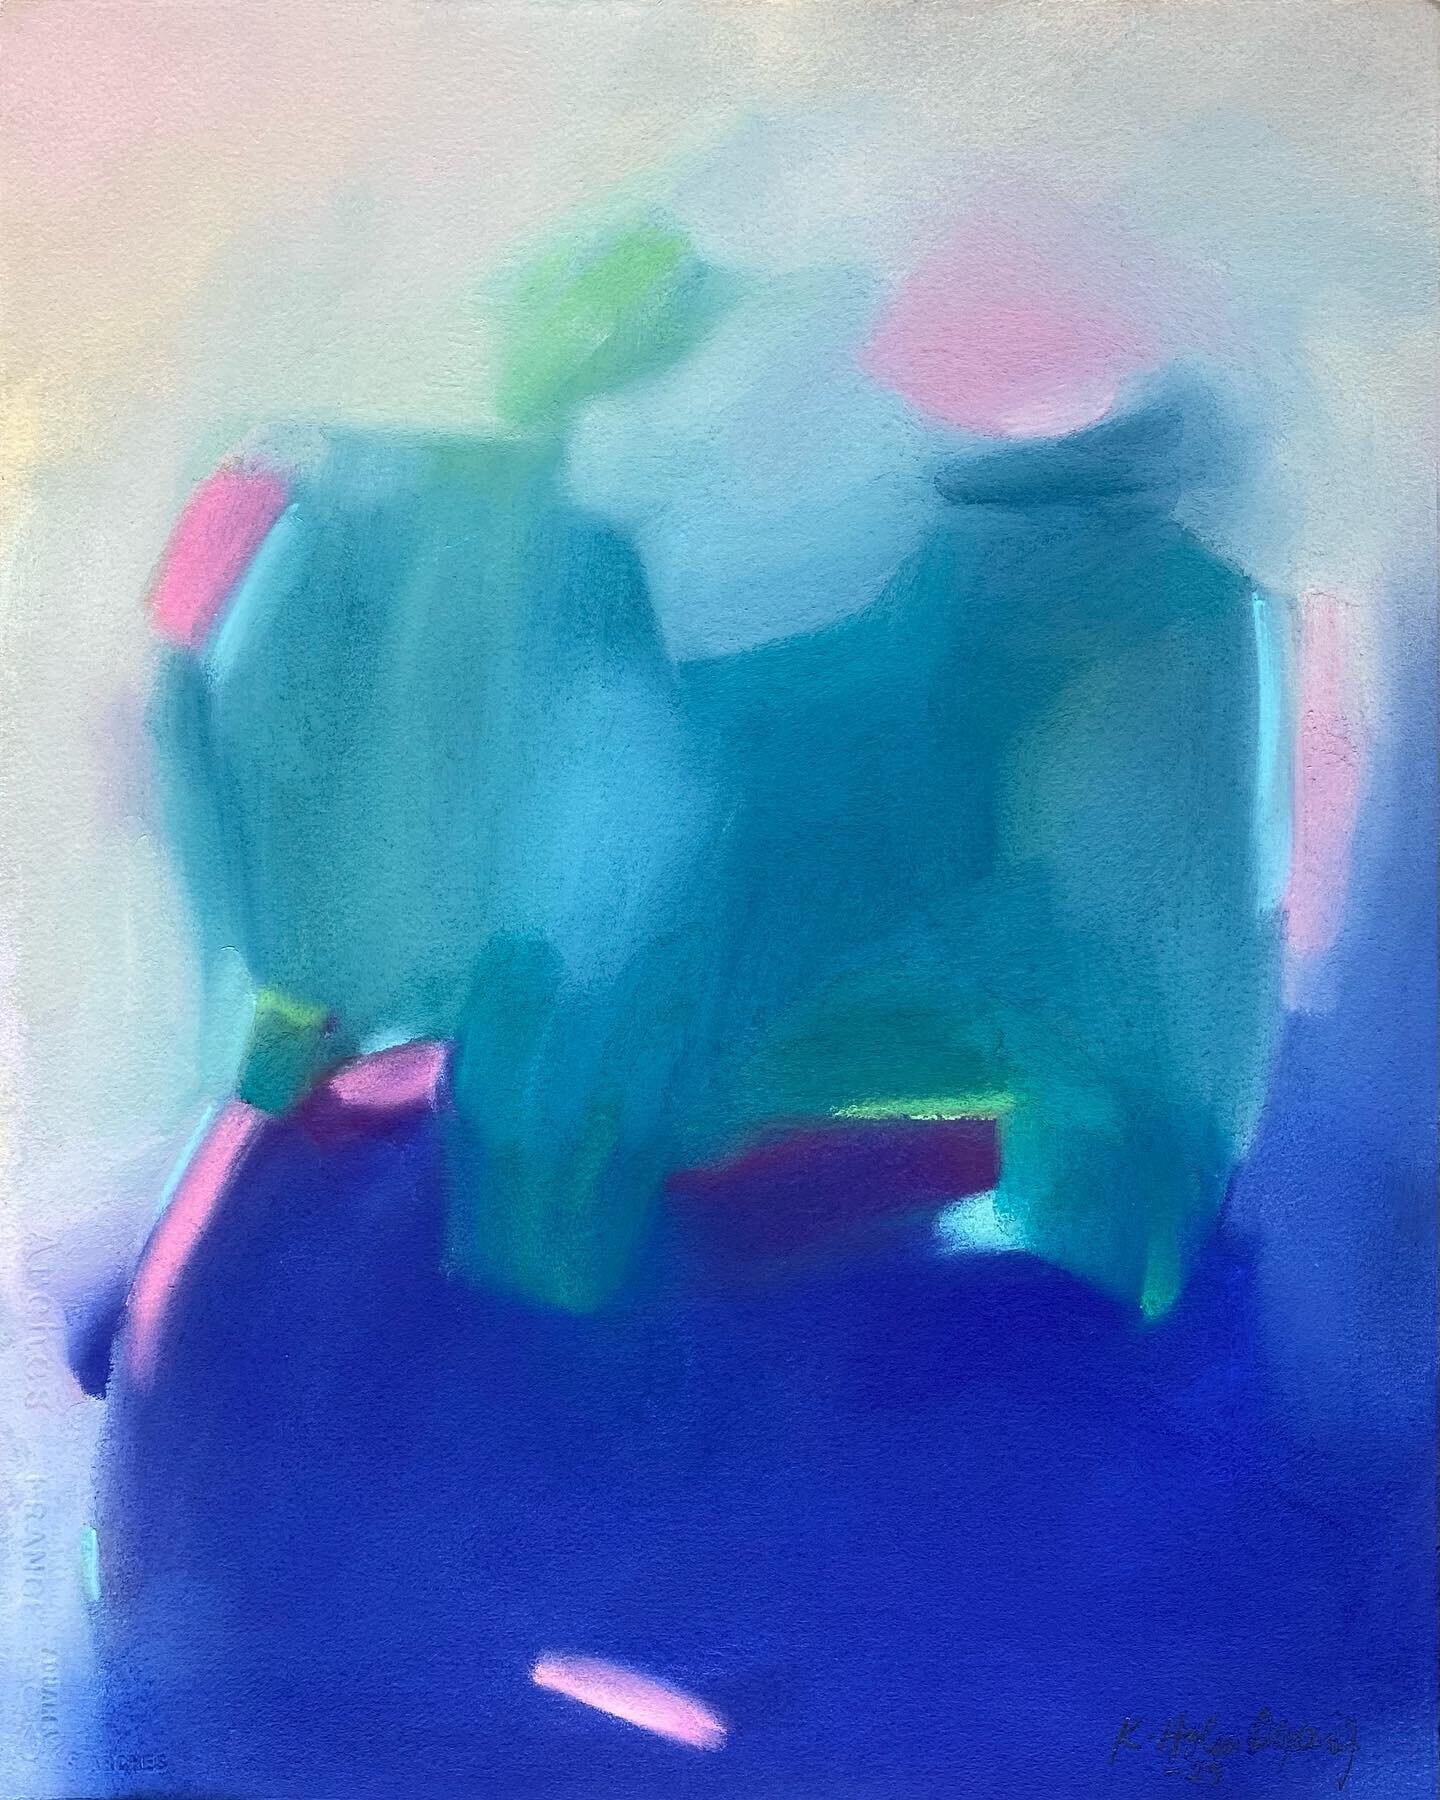 Colourful Caprice #5
.
Size: 51 x 41 cm
Pastels on paper 

This artwork belong in the Colour Poetry series.  Created to drive away grey days and bring warmth and vigour into life.  The colours flow into each other impulsively and seemingly on a whim,